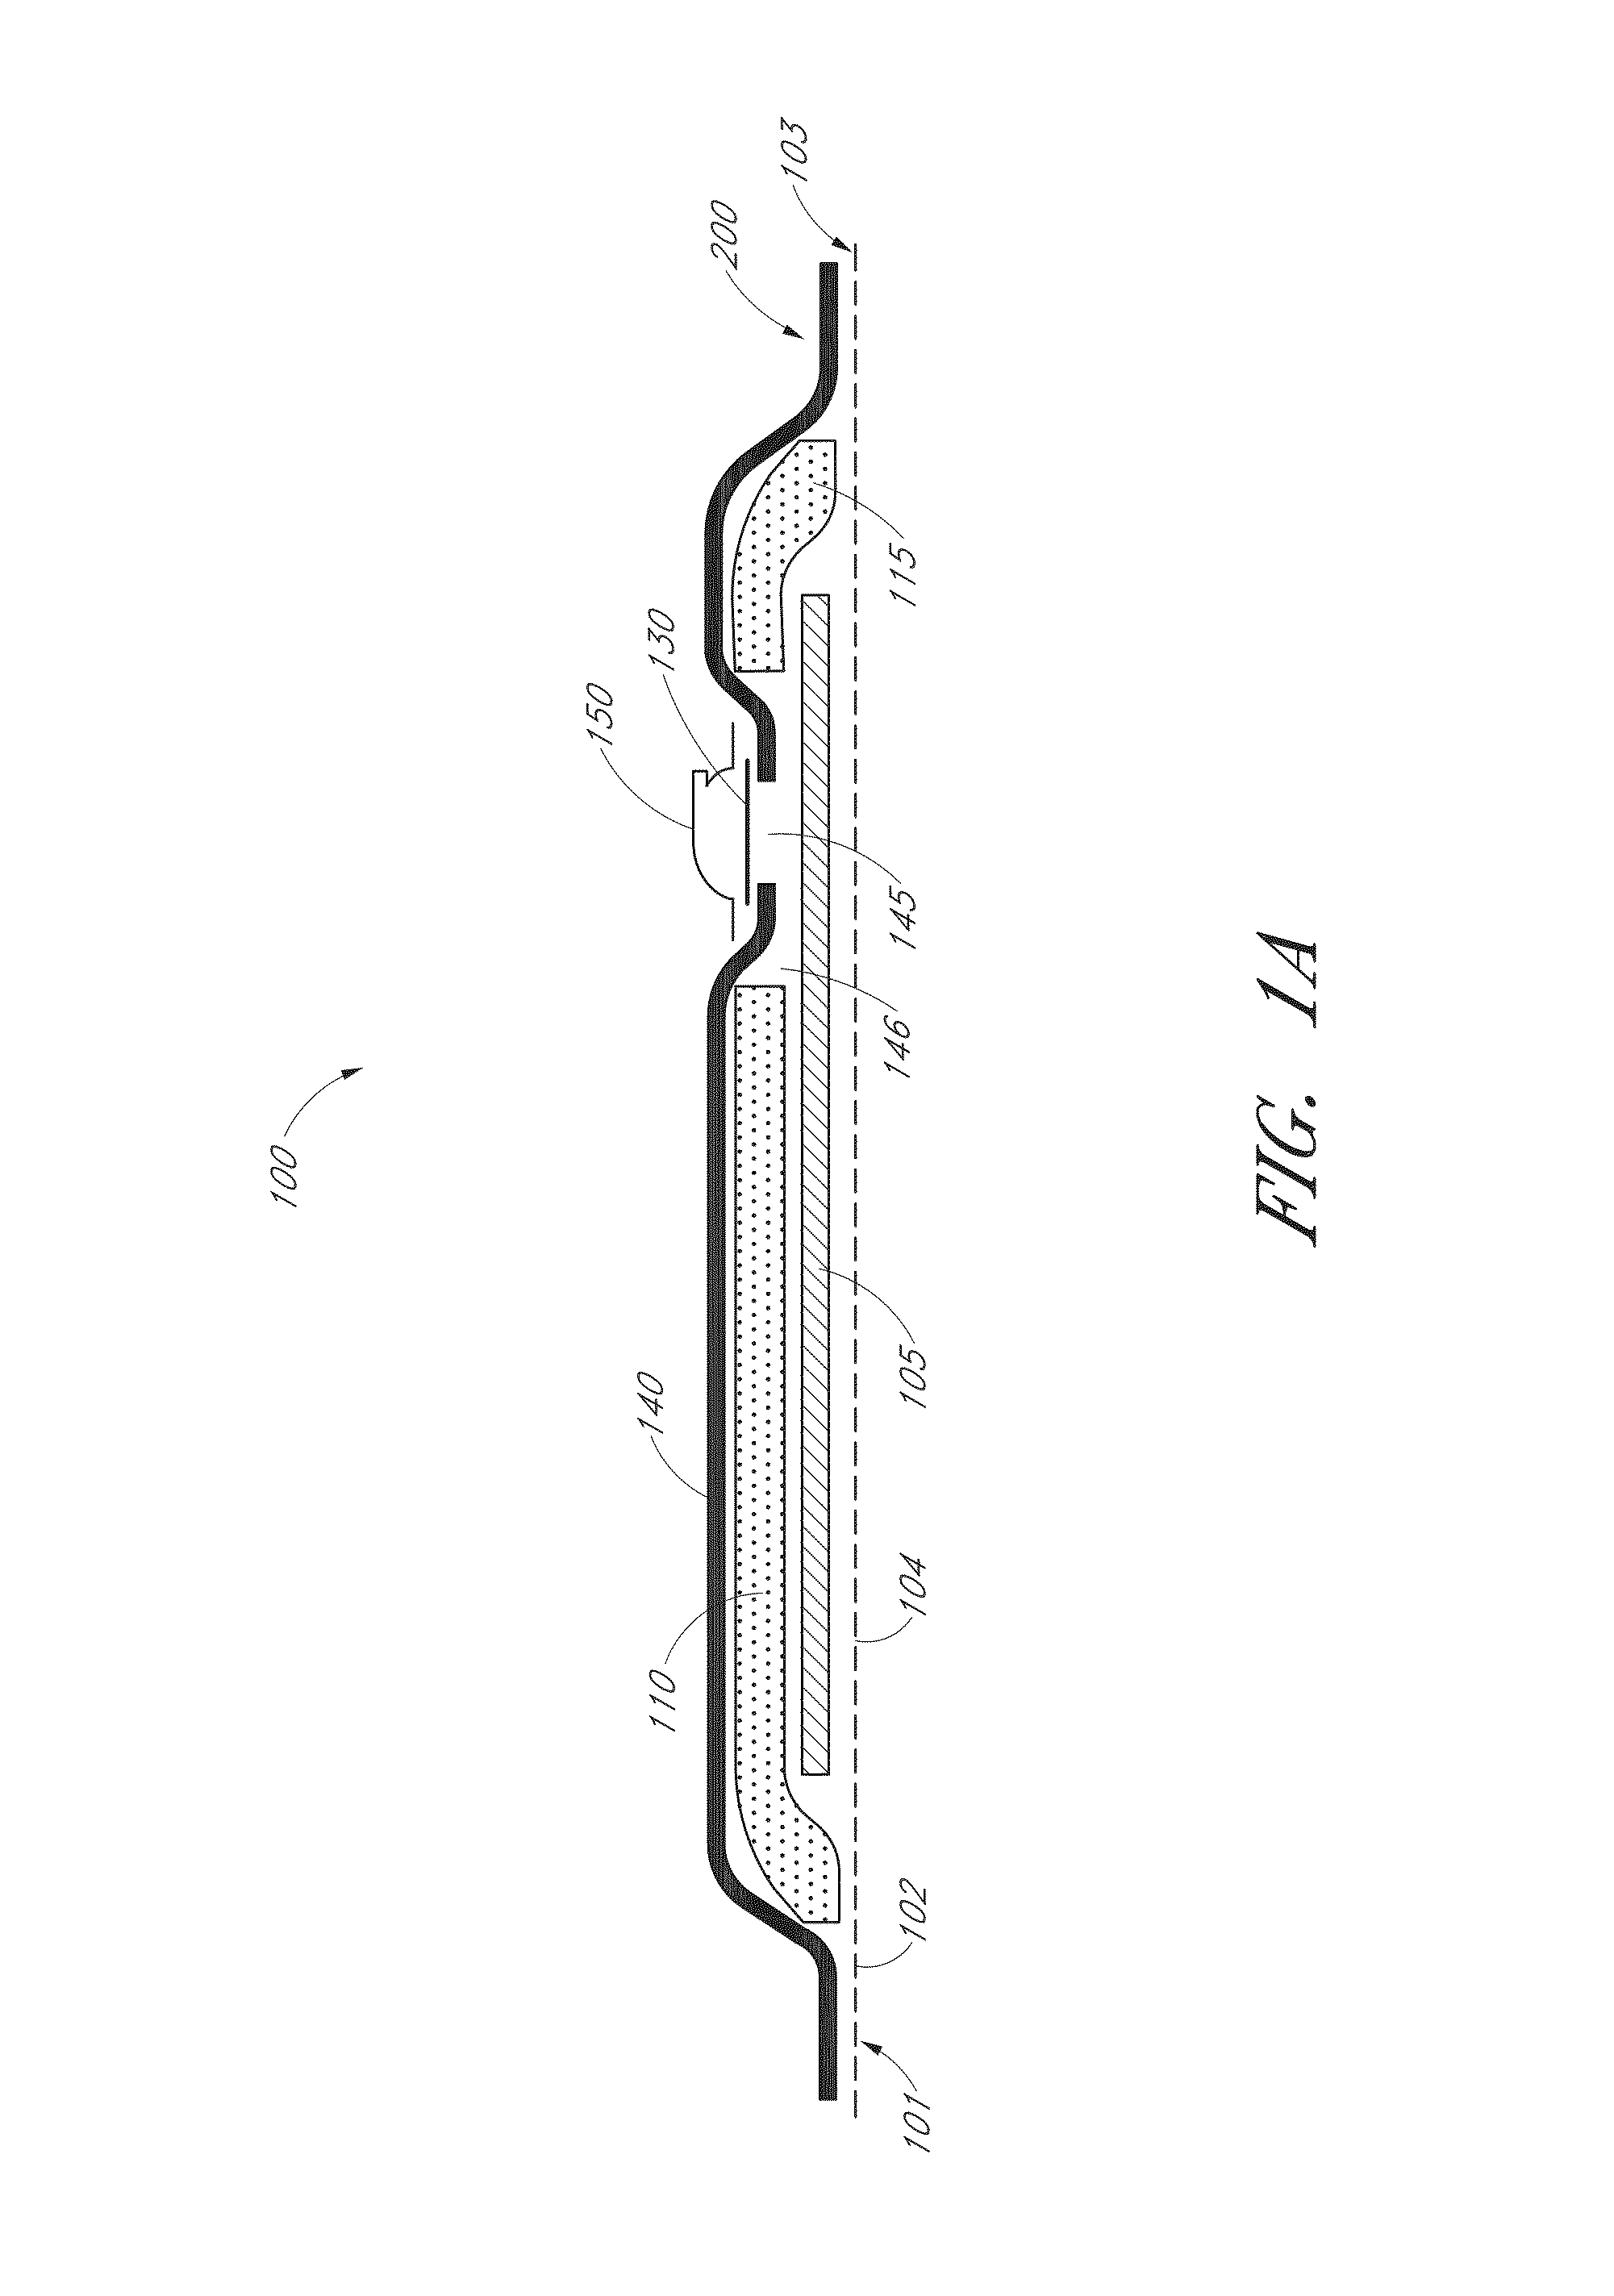 Wound dressing and method of use